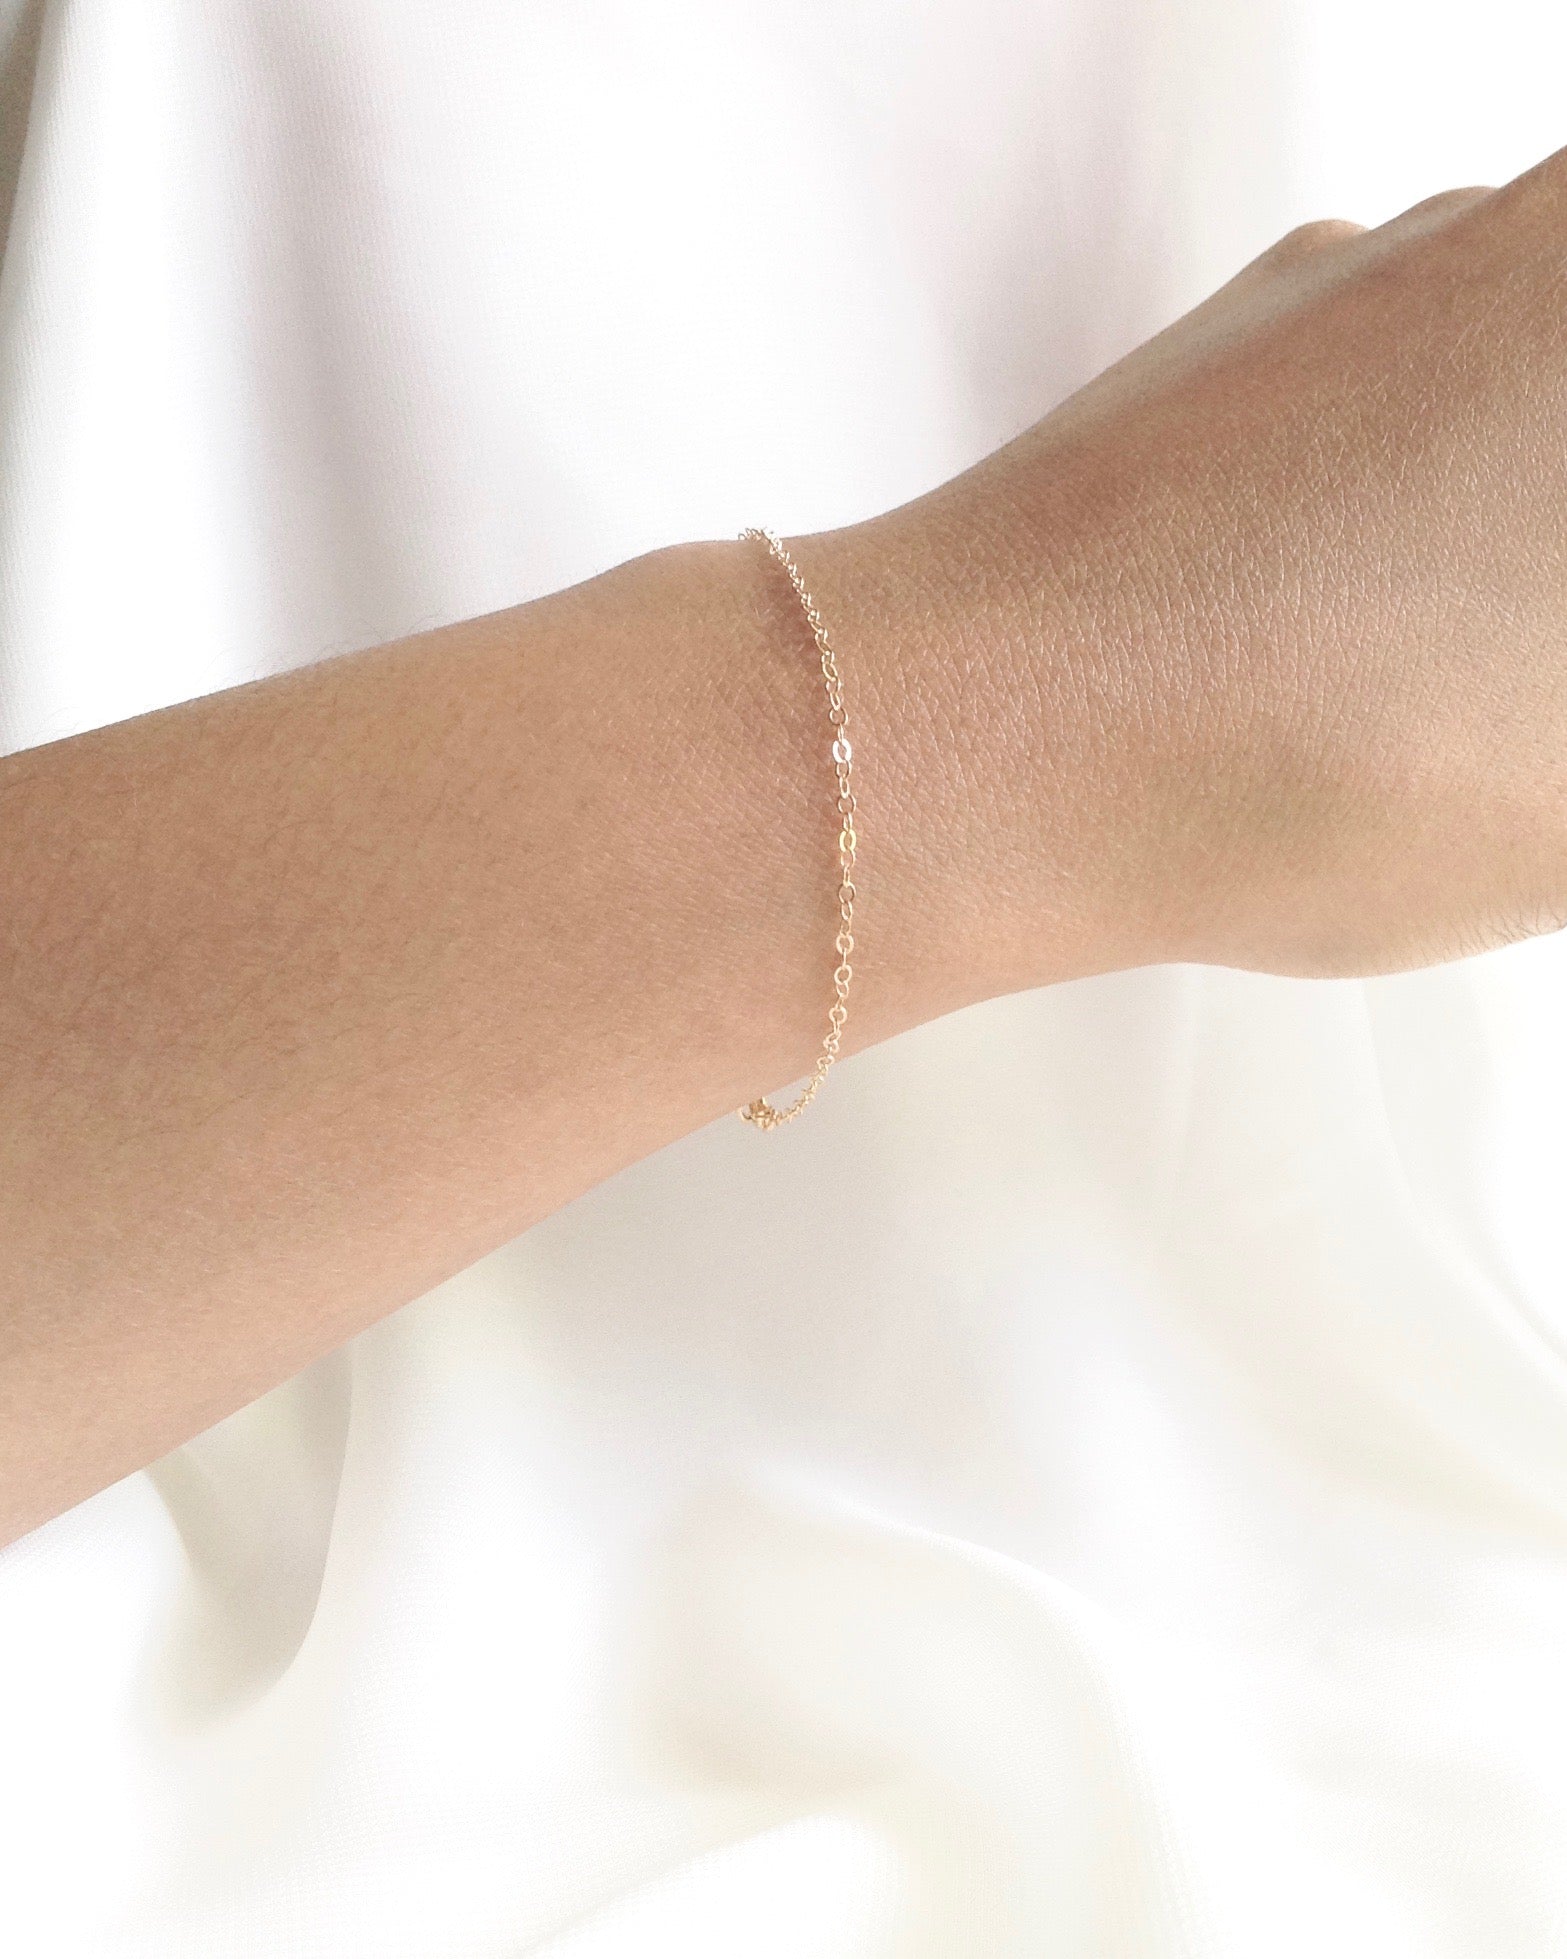 Minimal Thin Chain Bracelet in Gold Filled or Sterling Silver | IB Jewelry